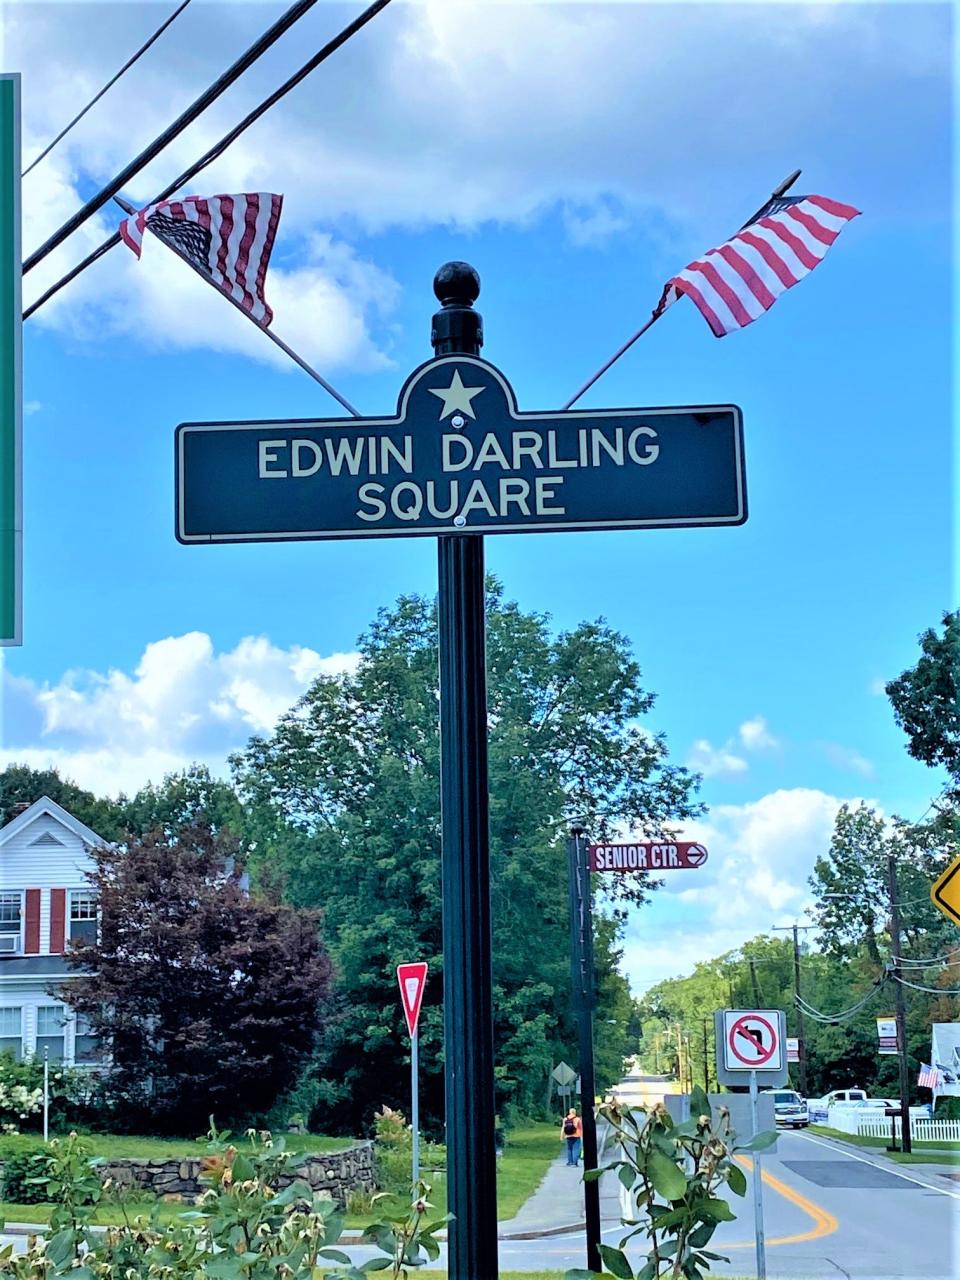 Edwin Darling Square in Westminster